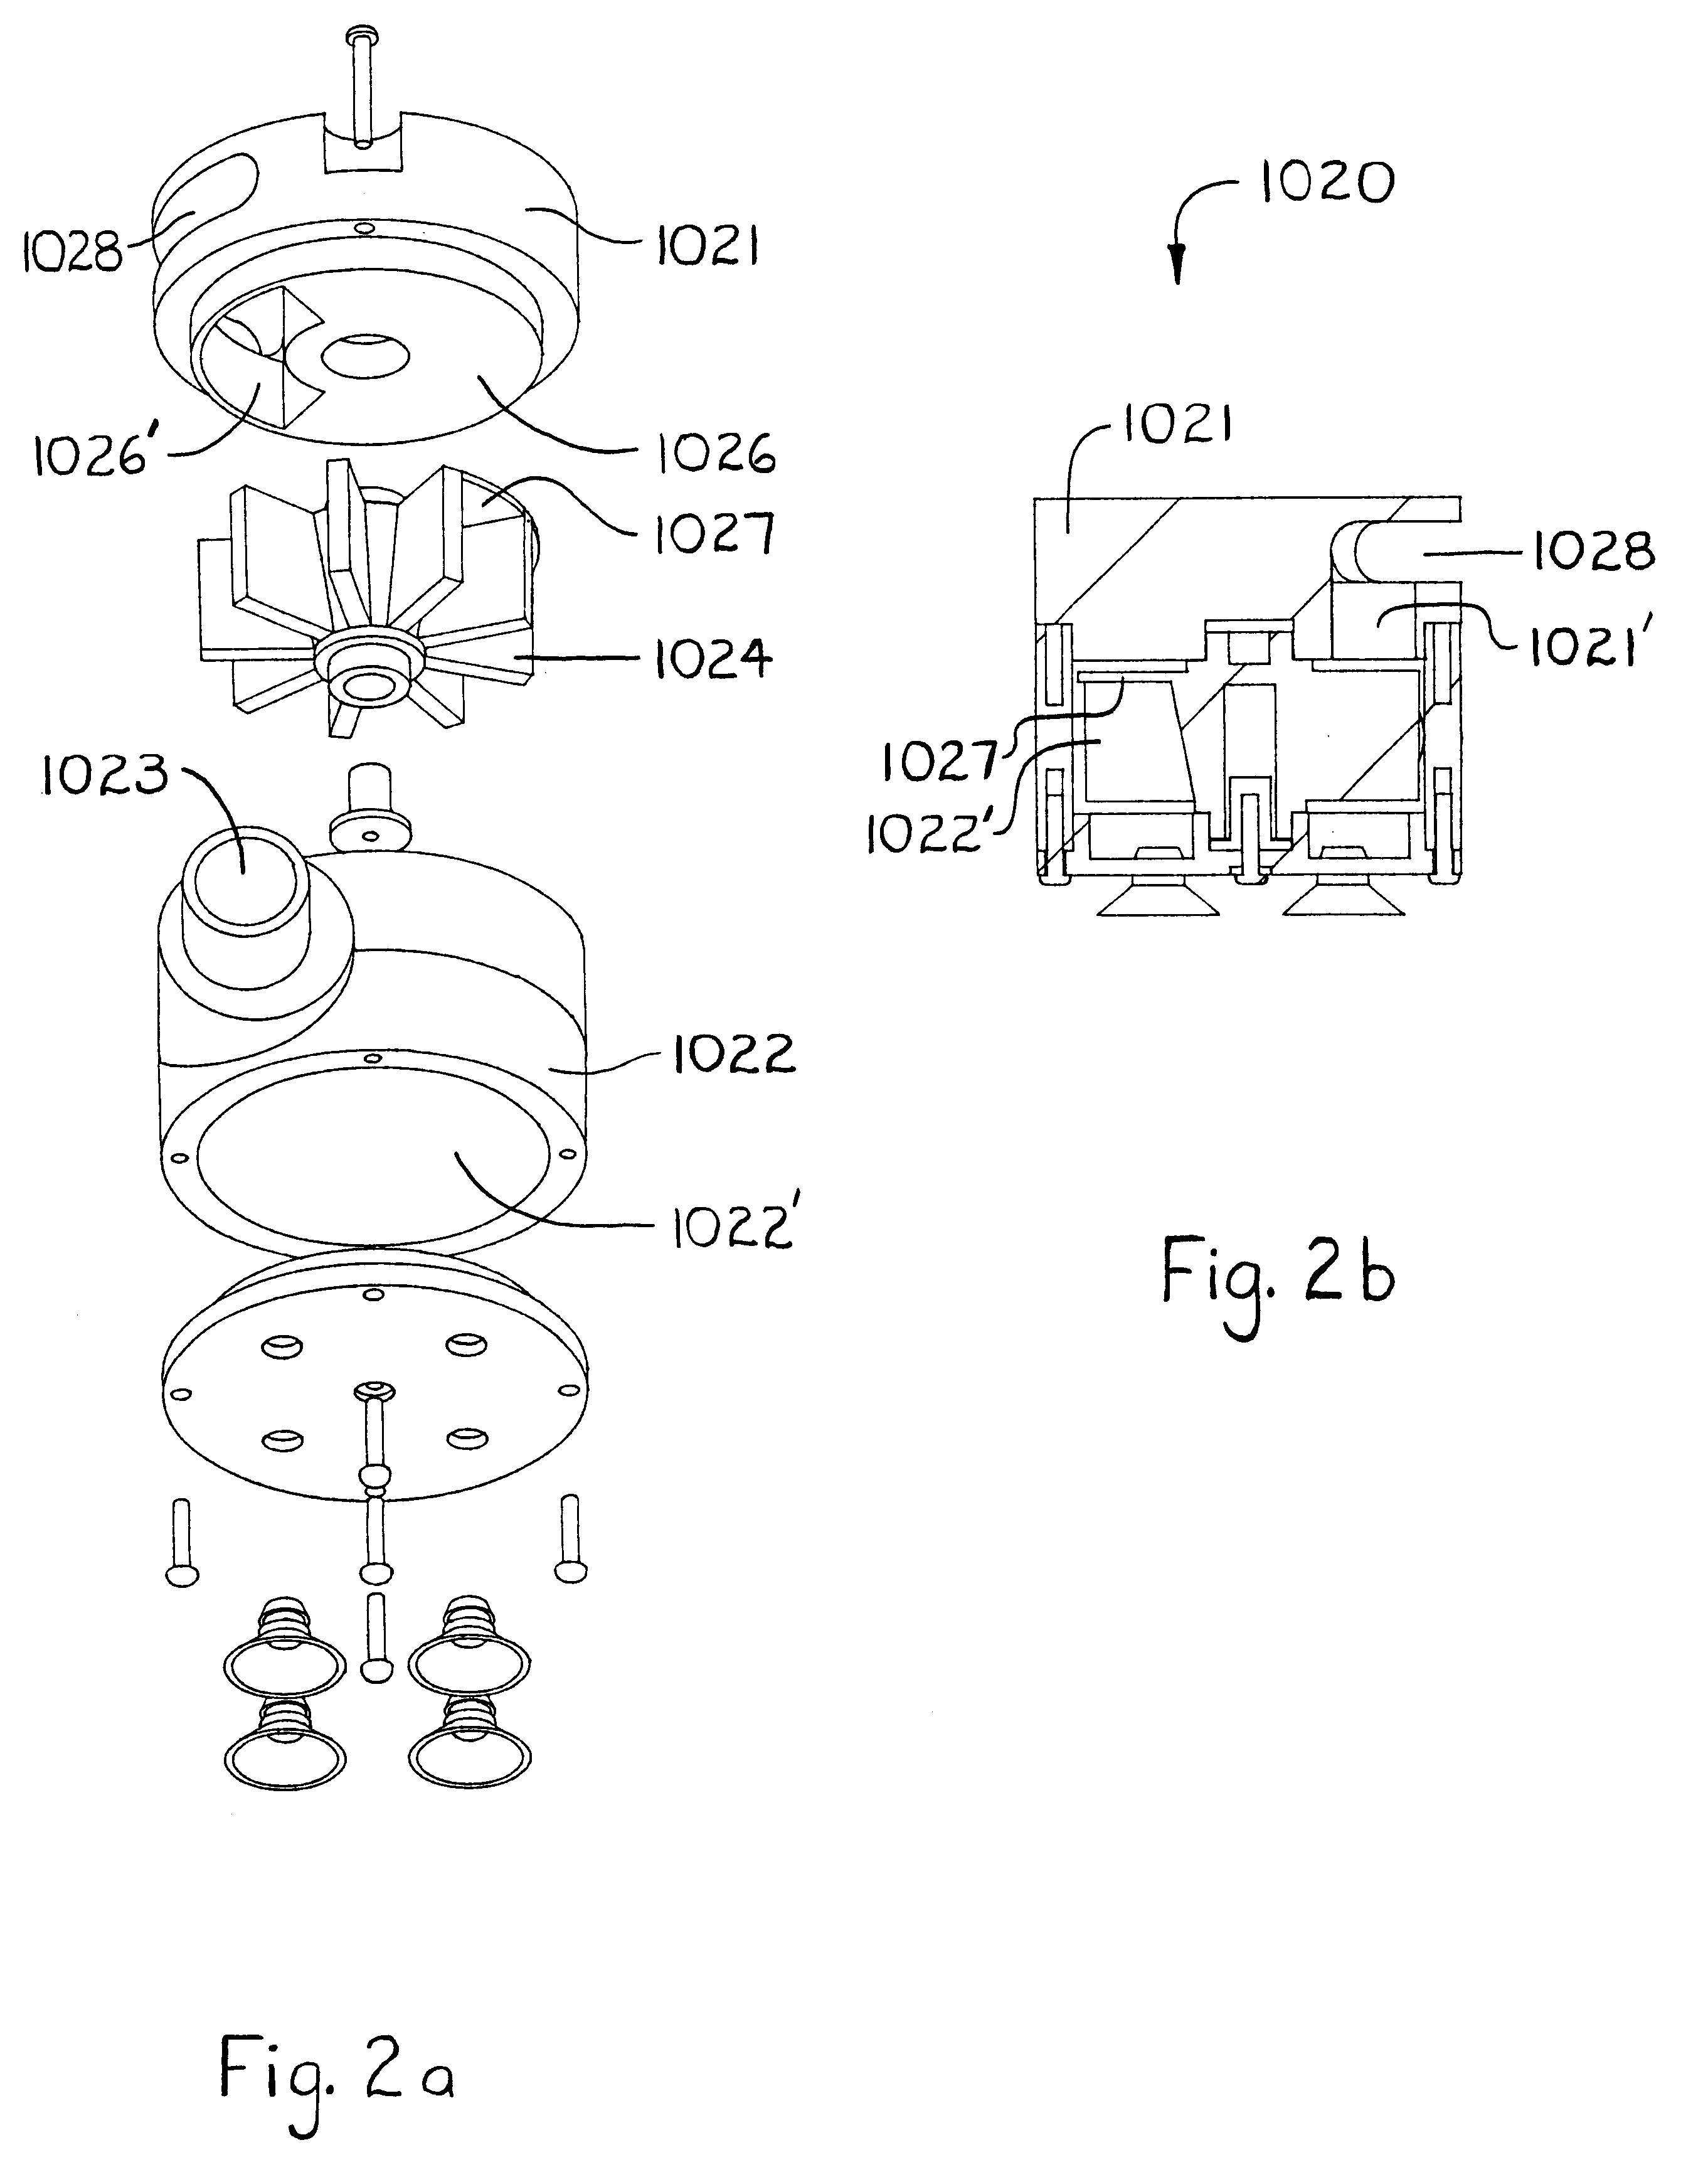 Agitators for wave-making or mixing as for tanks, and pumps and filters